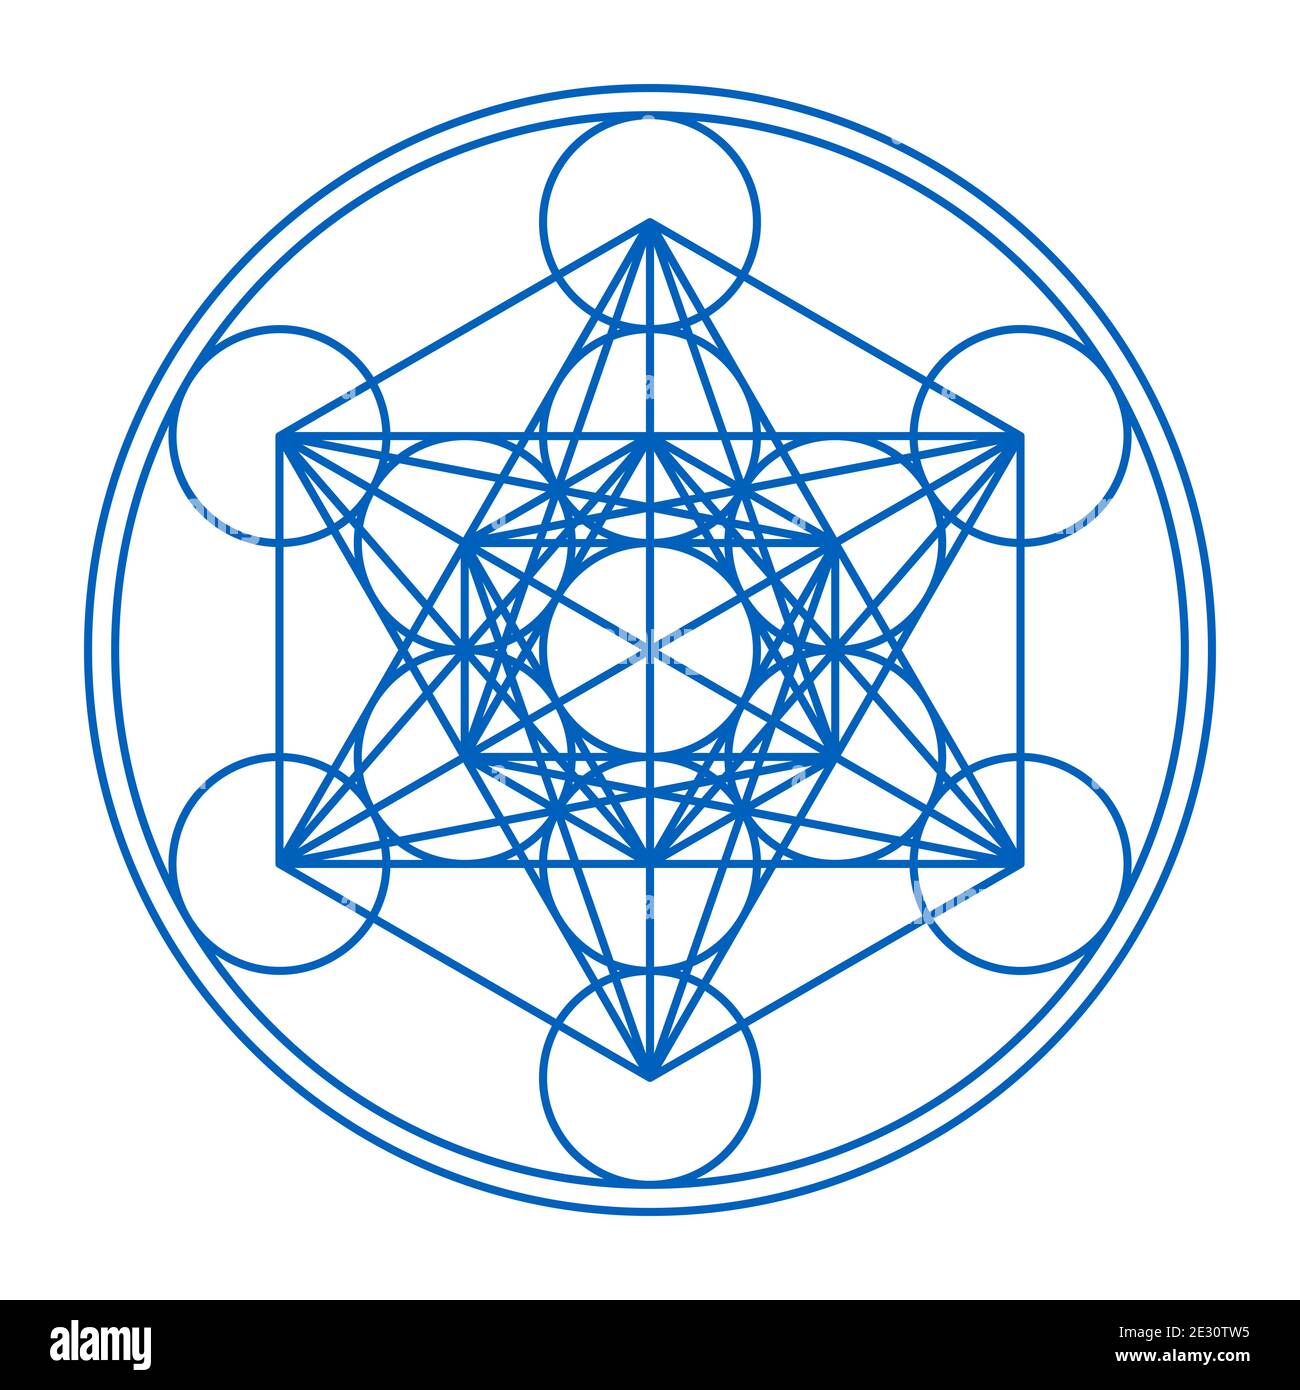 Metatrons Cube framed in two circles. Mystical symbol, derived from the Flower of Life. Thirteen circles are connected with straight lines. Stock Photo